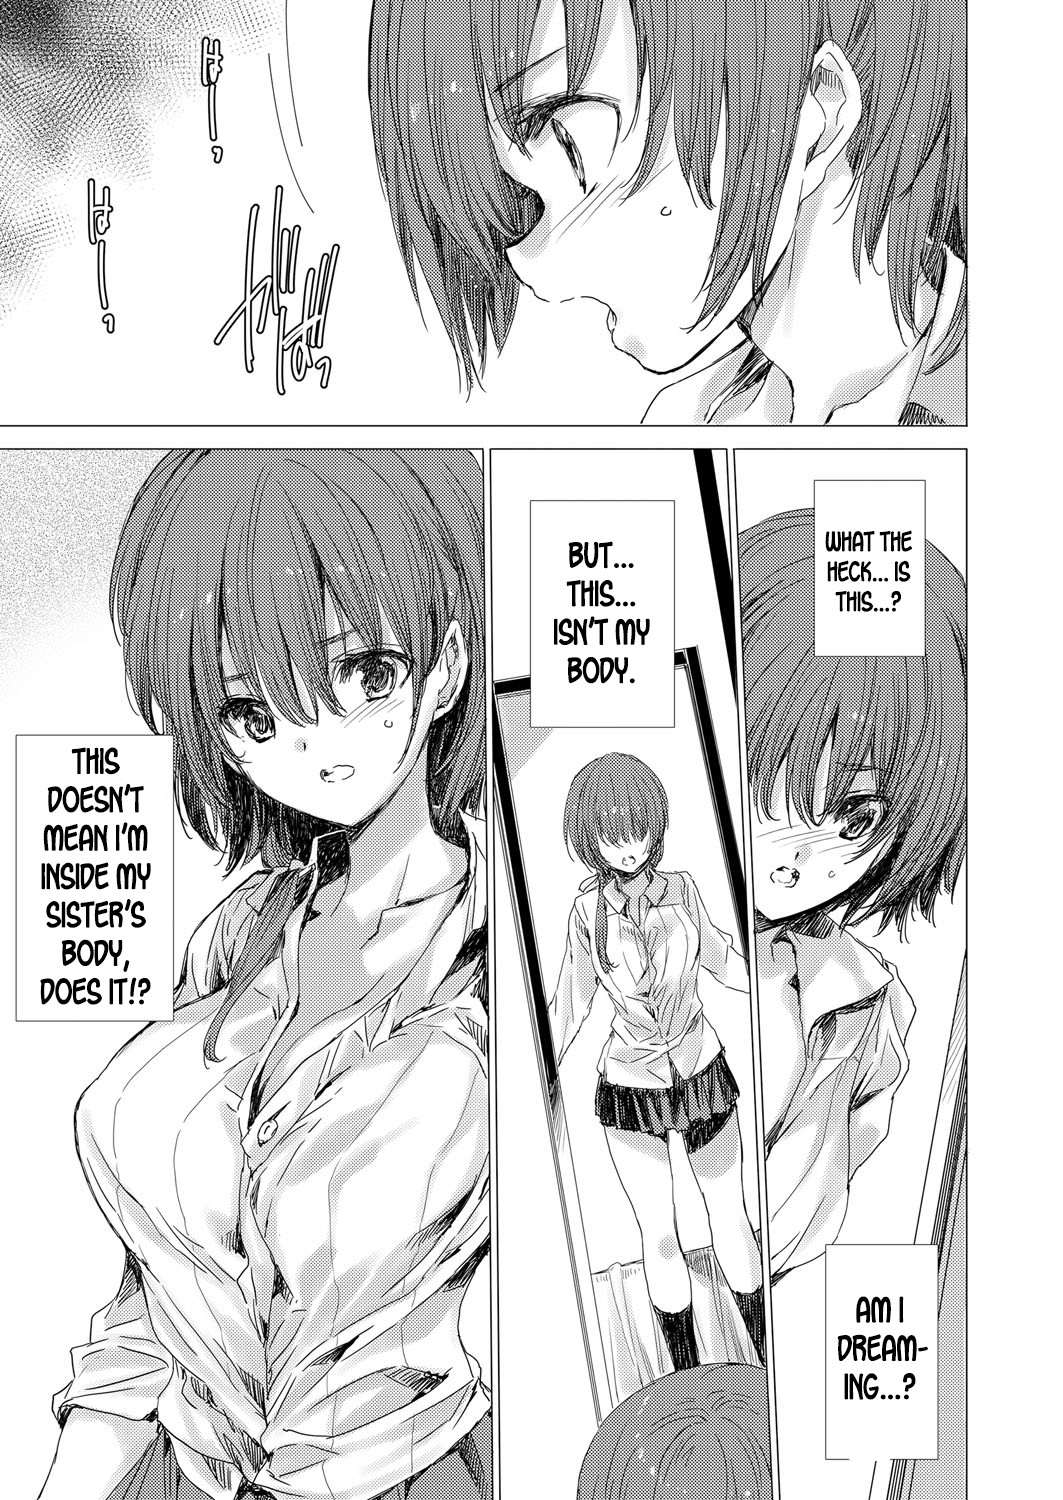 Hentai Manga Comic-Younger Sister Rape Revenge Quest ~Doing as I Please With the Takeover of Her Virtual and Real Body~ Level 1-Read-1